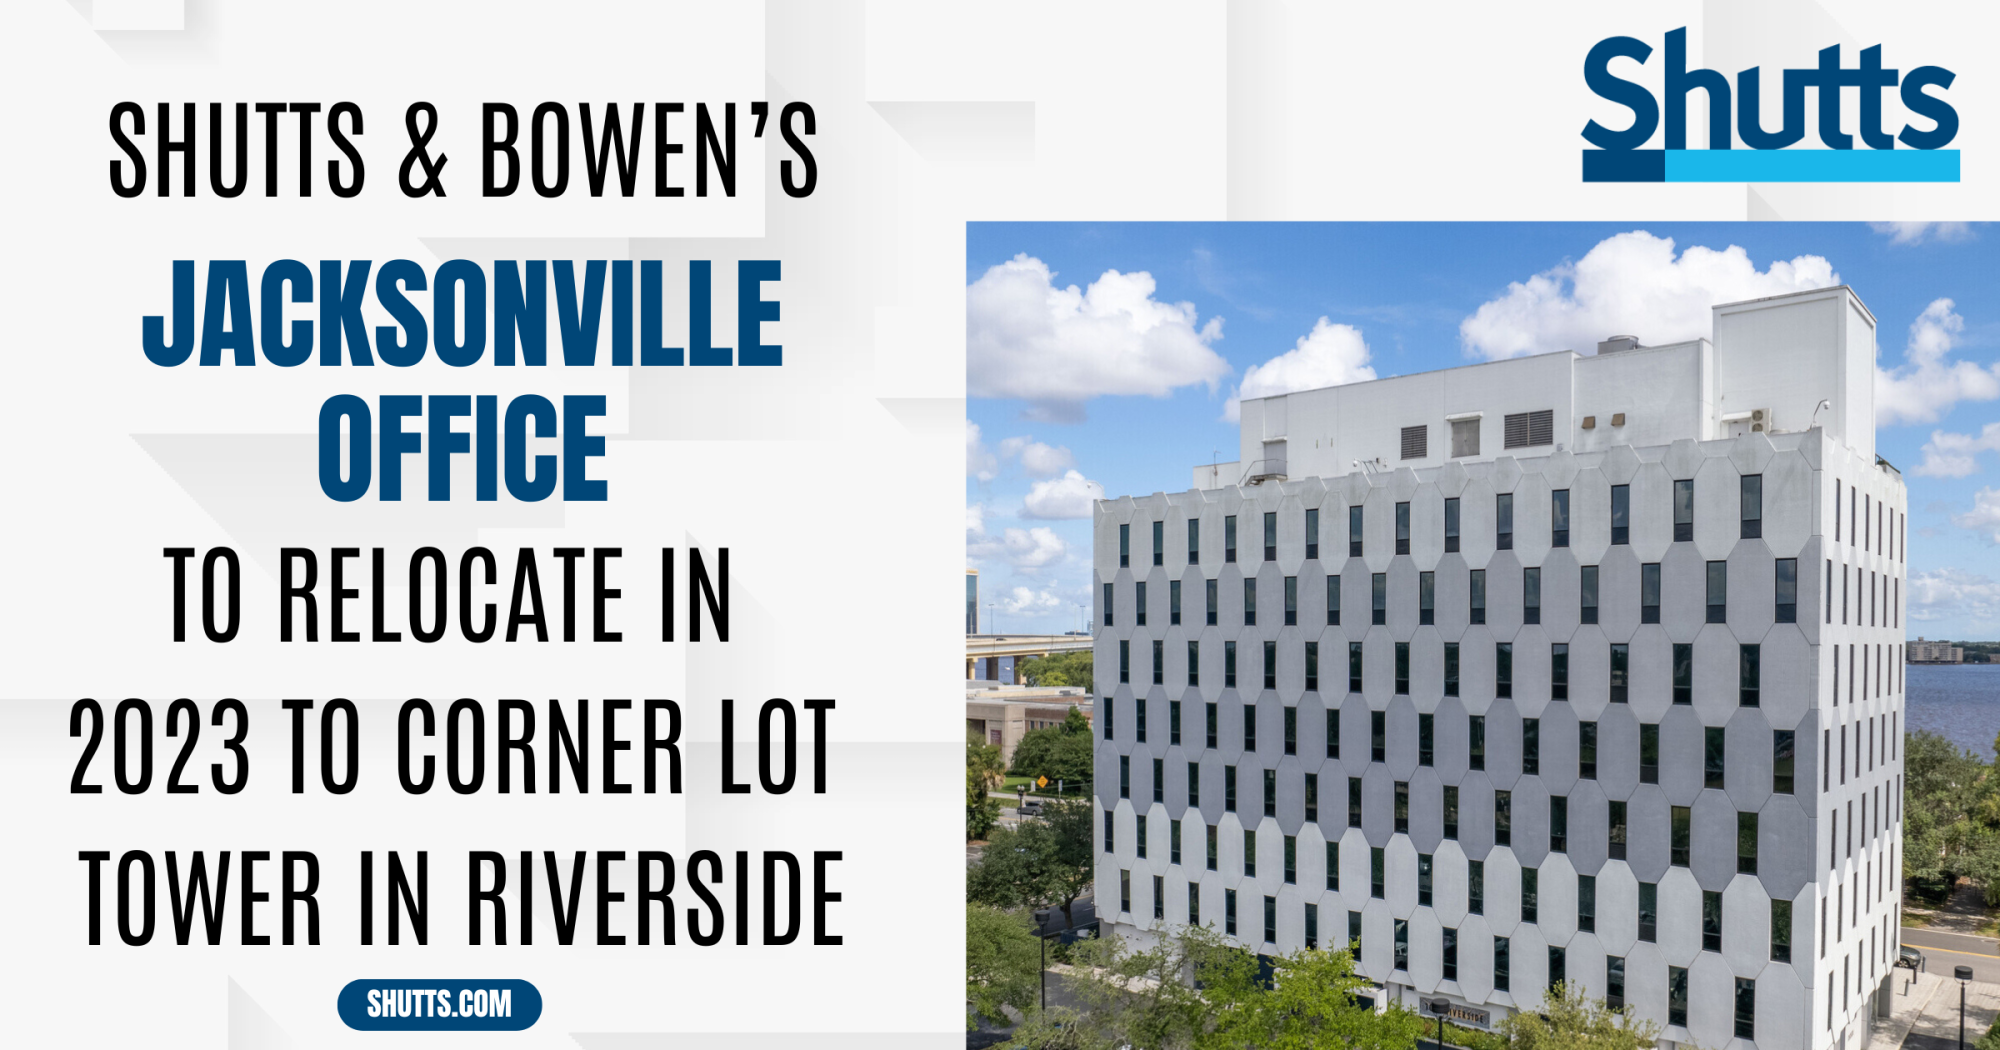 Shutts & Bowen’s Jacksonville Office to Relocate in 2023 to Corner Lot Tower in Riverside